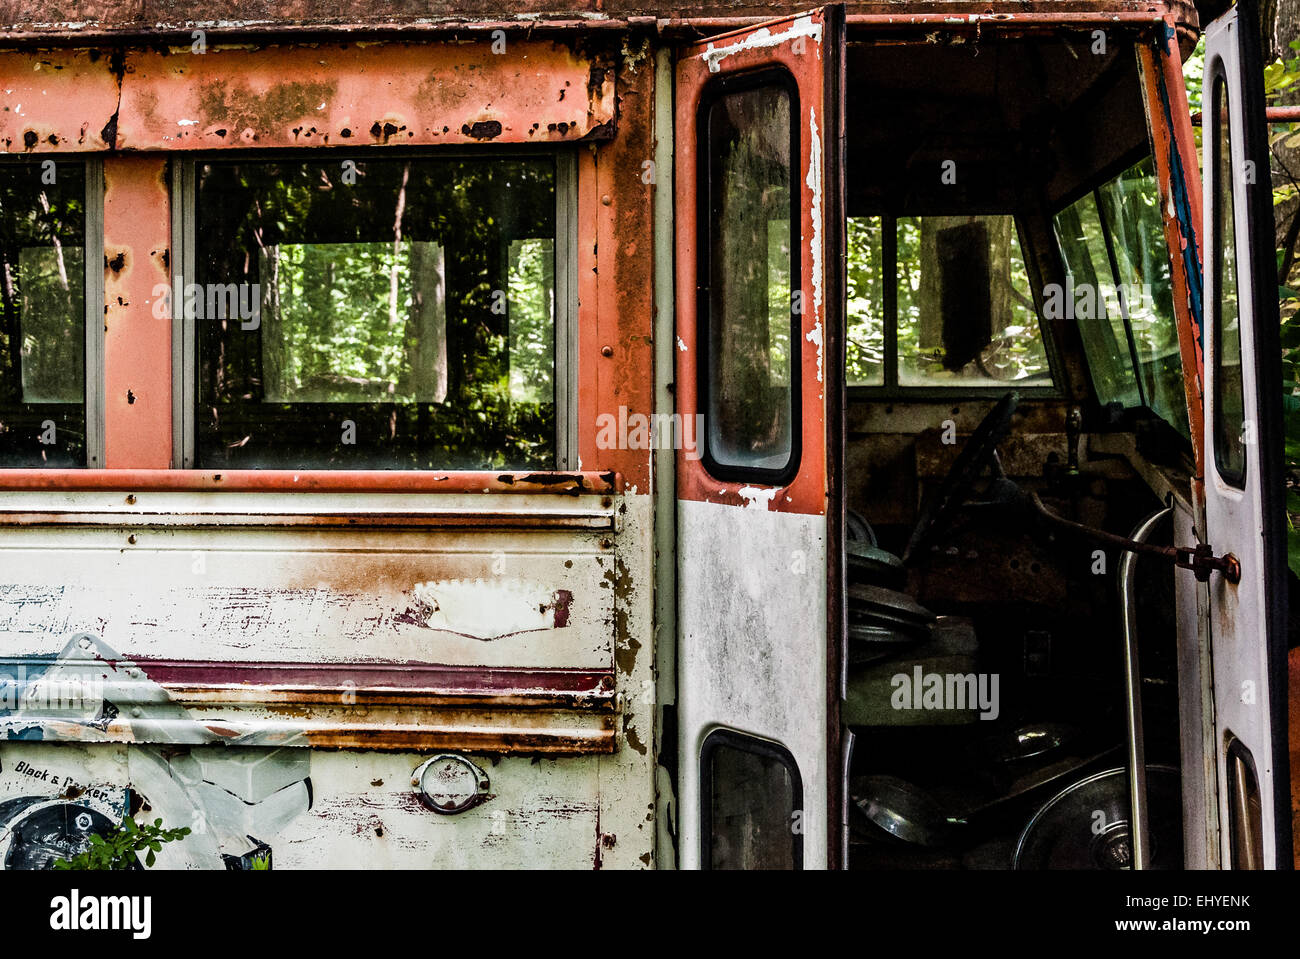 A rusty, abandoned bus Stock Photo